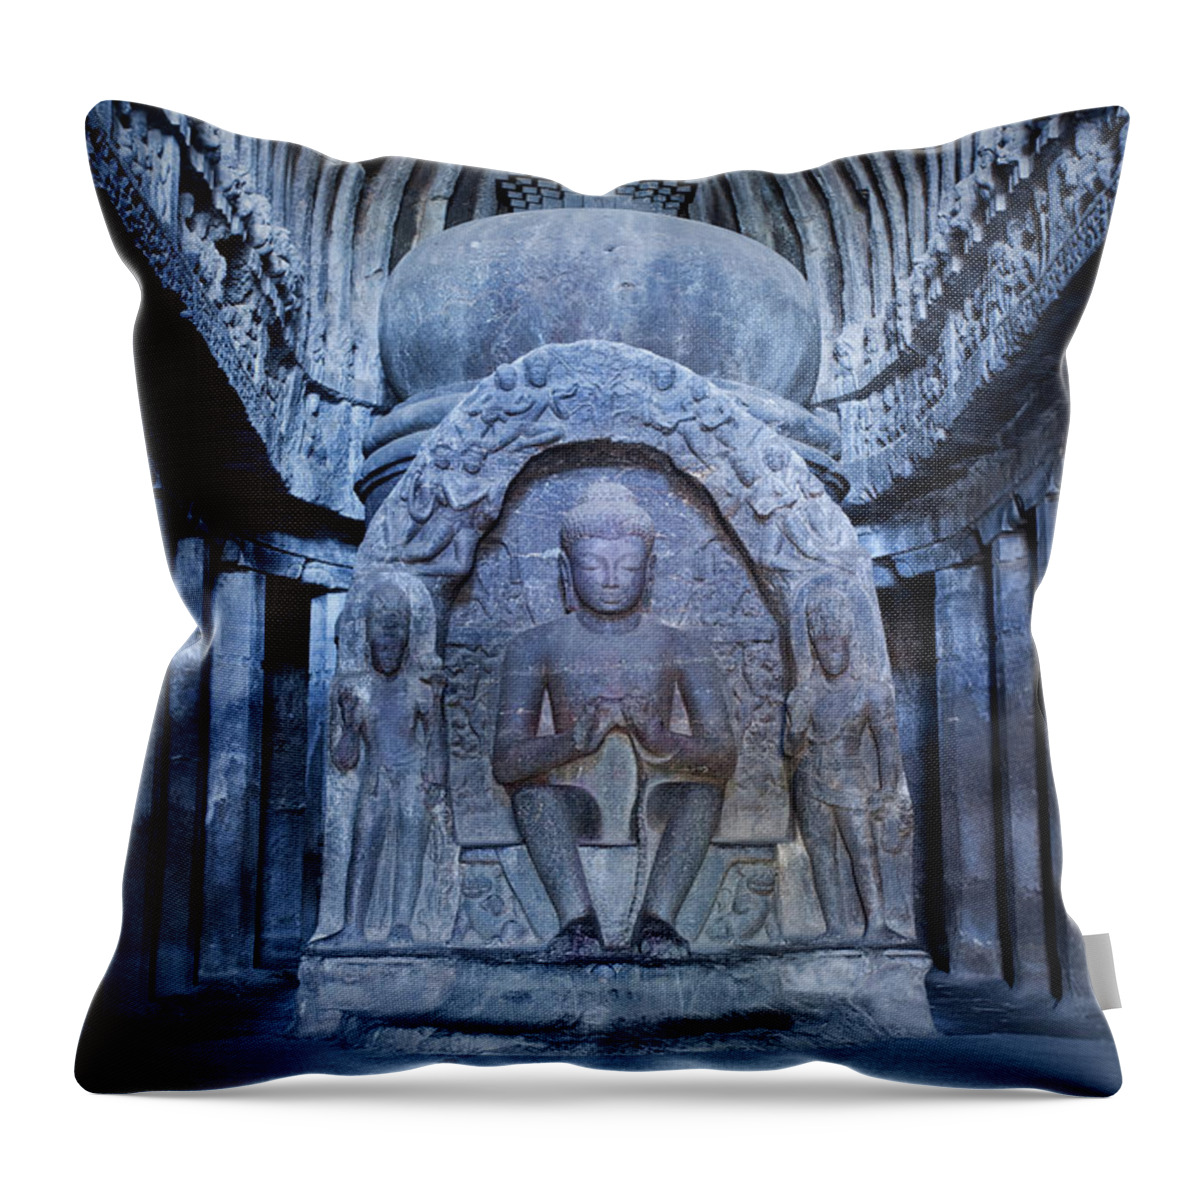 Relief Throw Pillow featuring the photograph Cave 10 In Ellora, India by Traveler1116